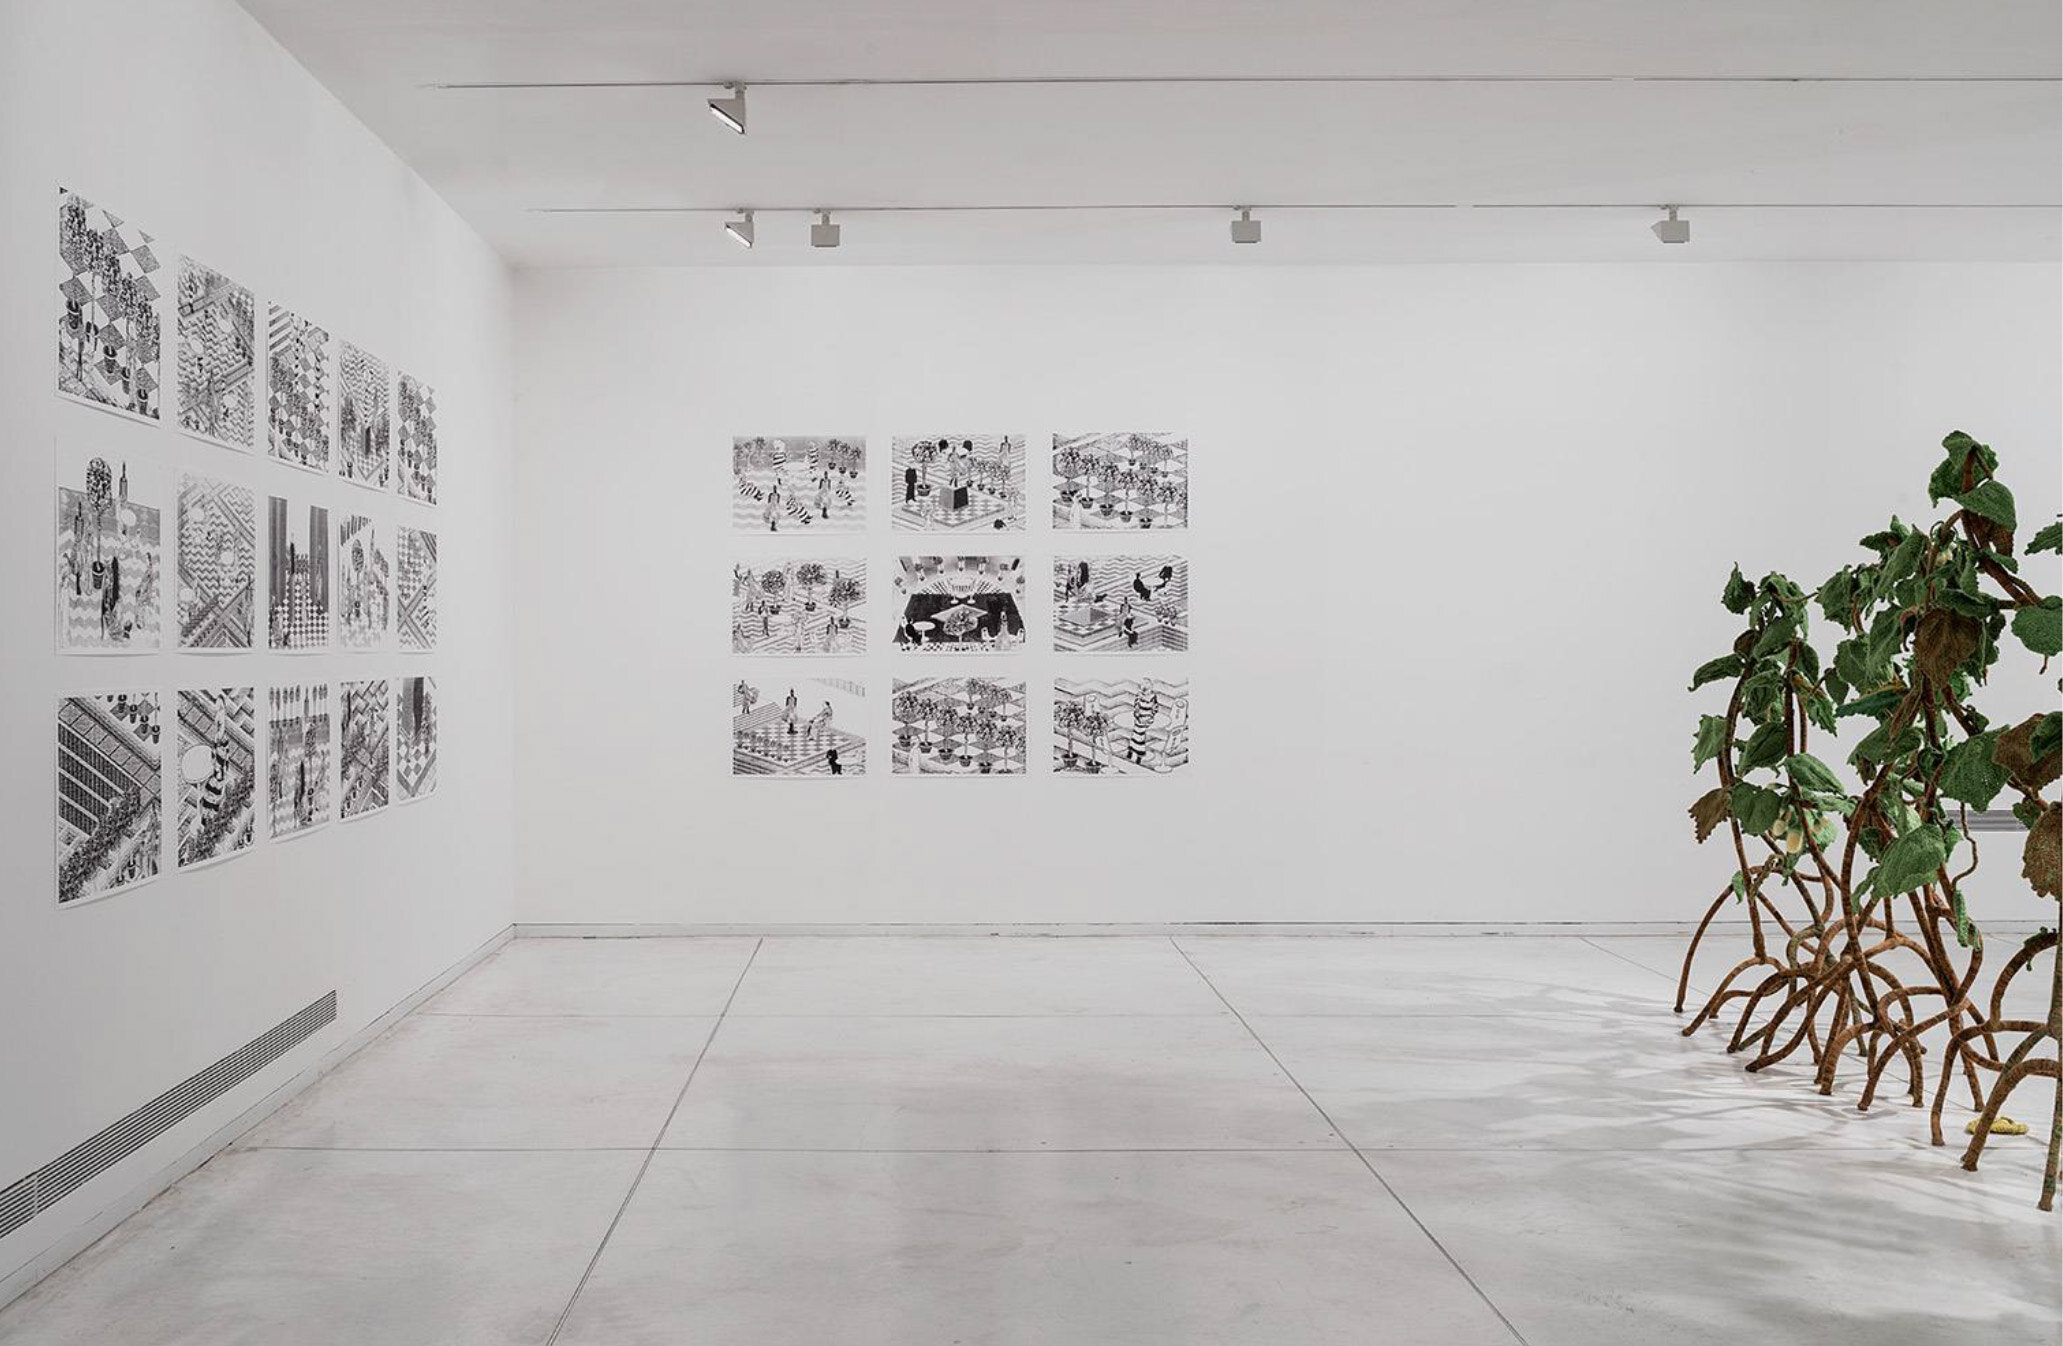  Dov Or-Ner,  Hotel for Crematoriums  (Palace-Pallax) installation view, Tel Aviv Museum 2018 